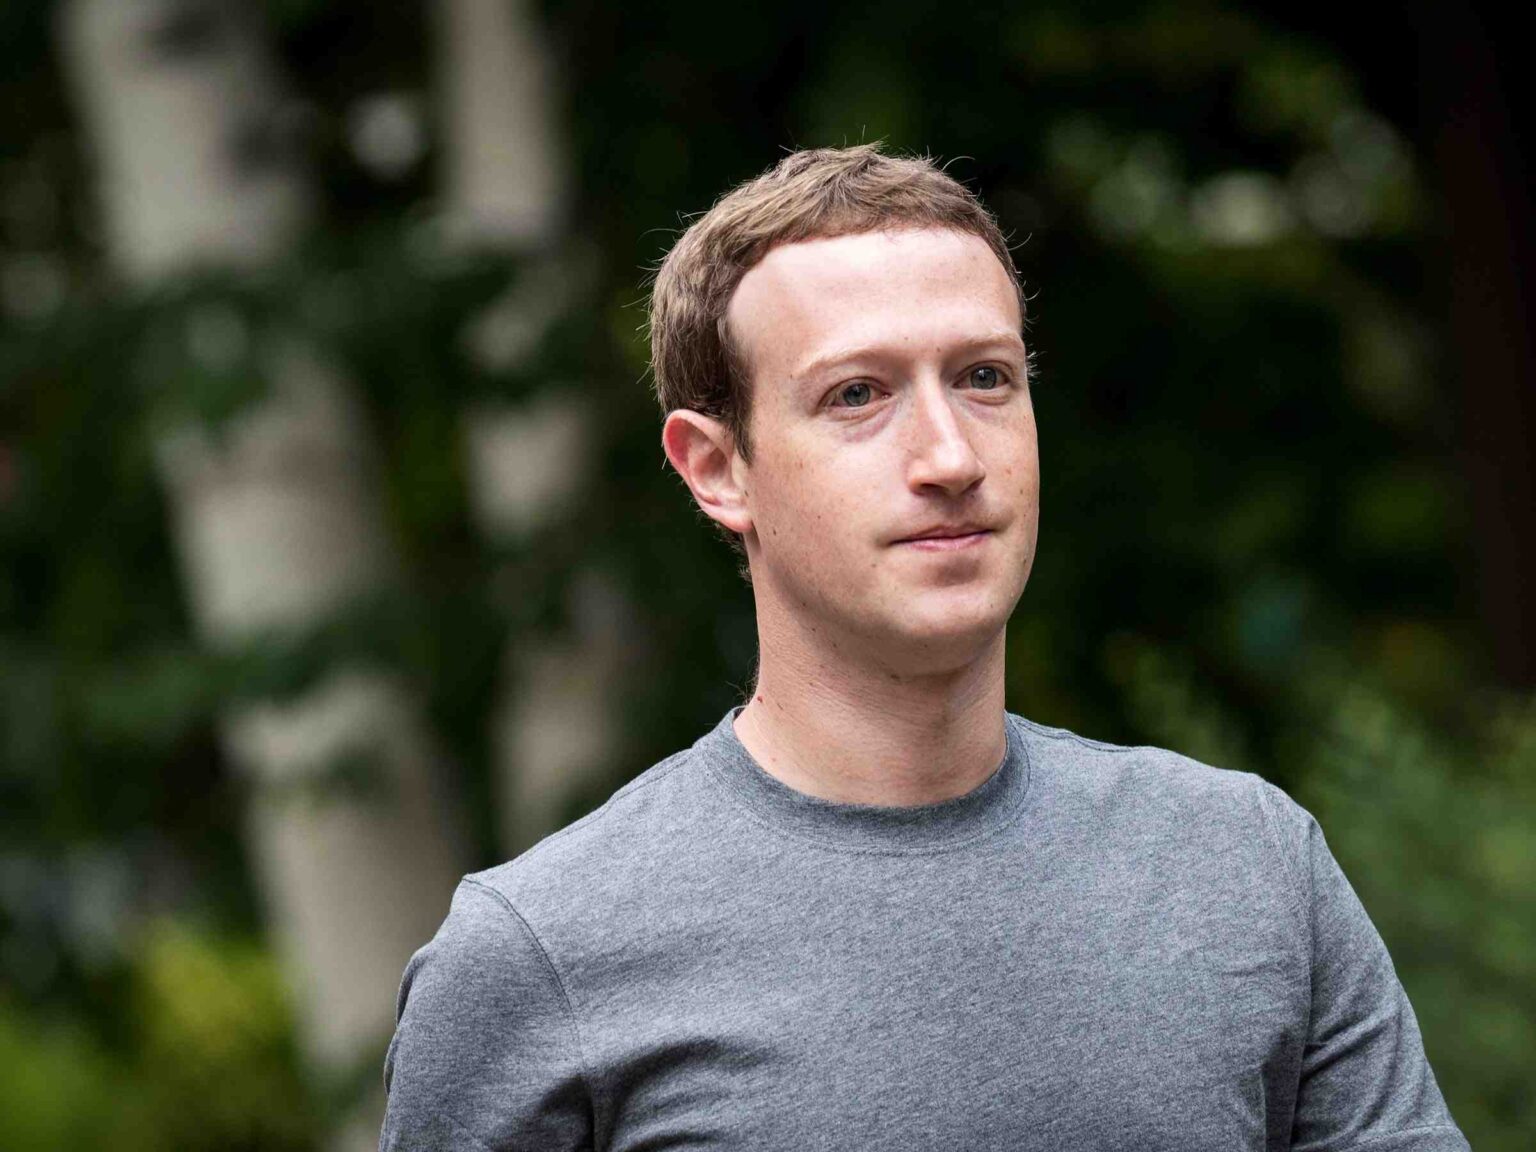 Supreme Court smackdown or Silicon Valley shuffle? See how "mark zuckerberg net worth" weathers legal storms with a surprisingly steady swagger. Click for billions in deets!